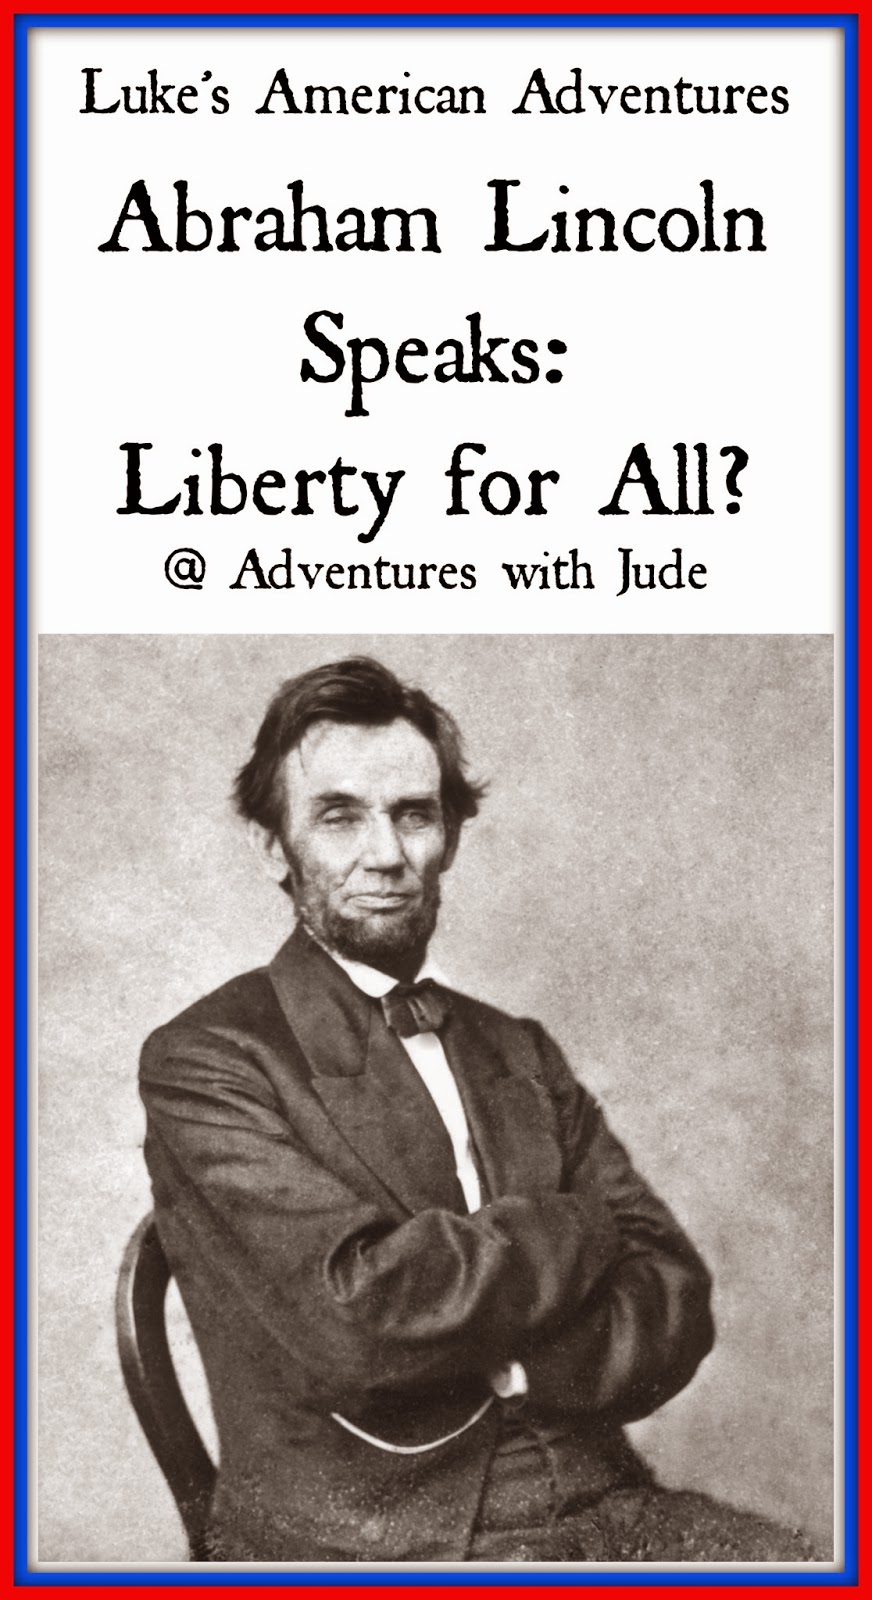 Abraham Lincoln Speaks: Liberty for All?